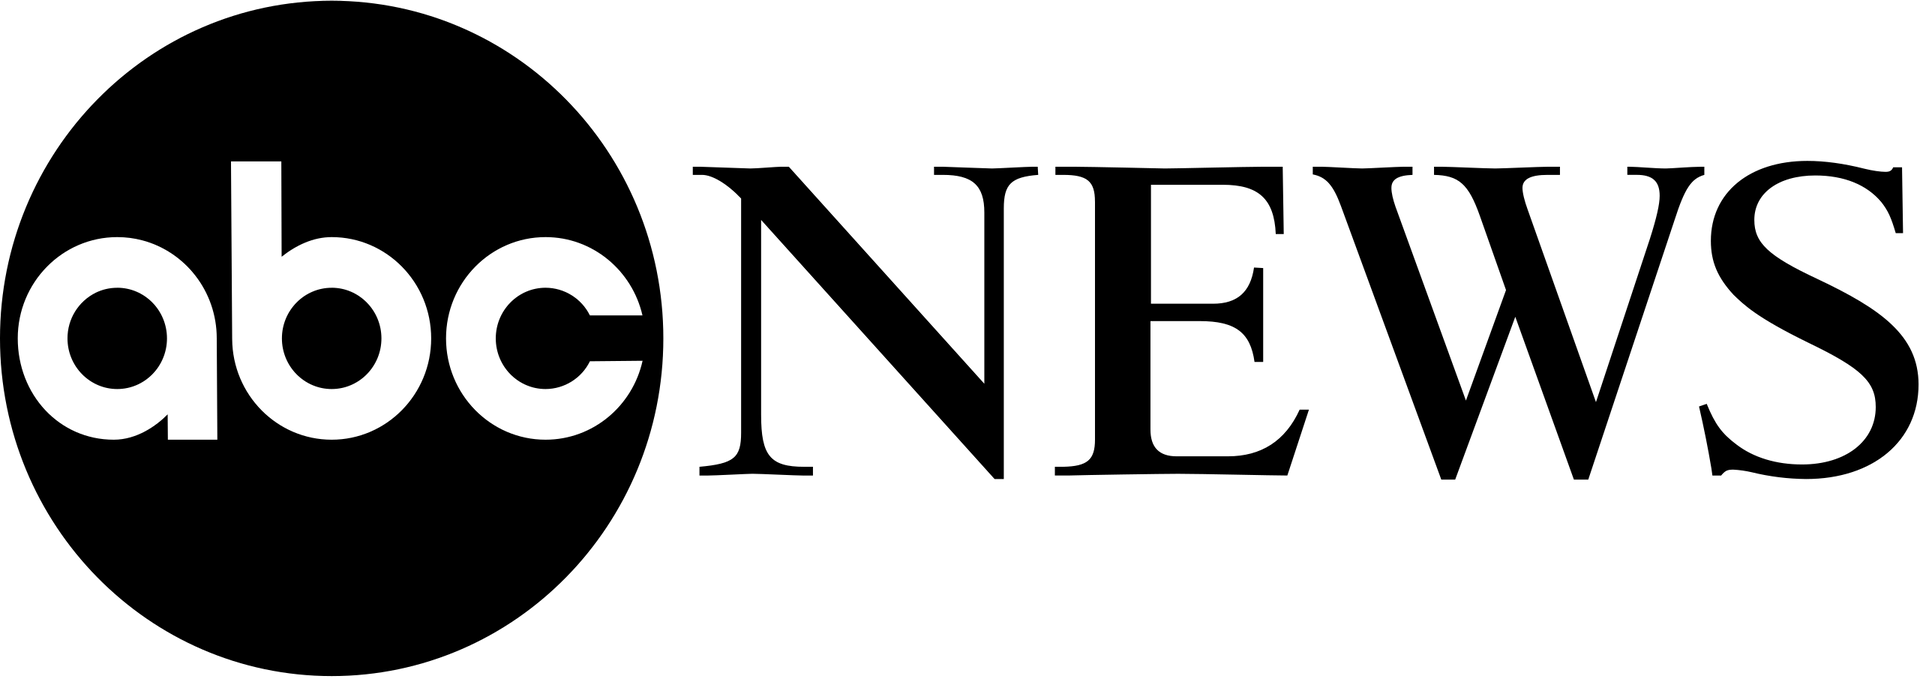 A black and white logo for abc news on a white background.